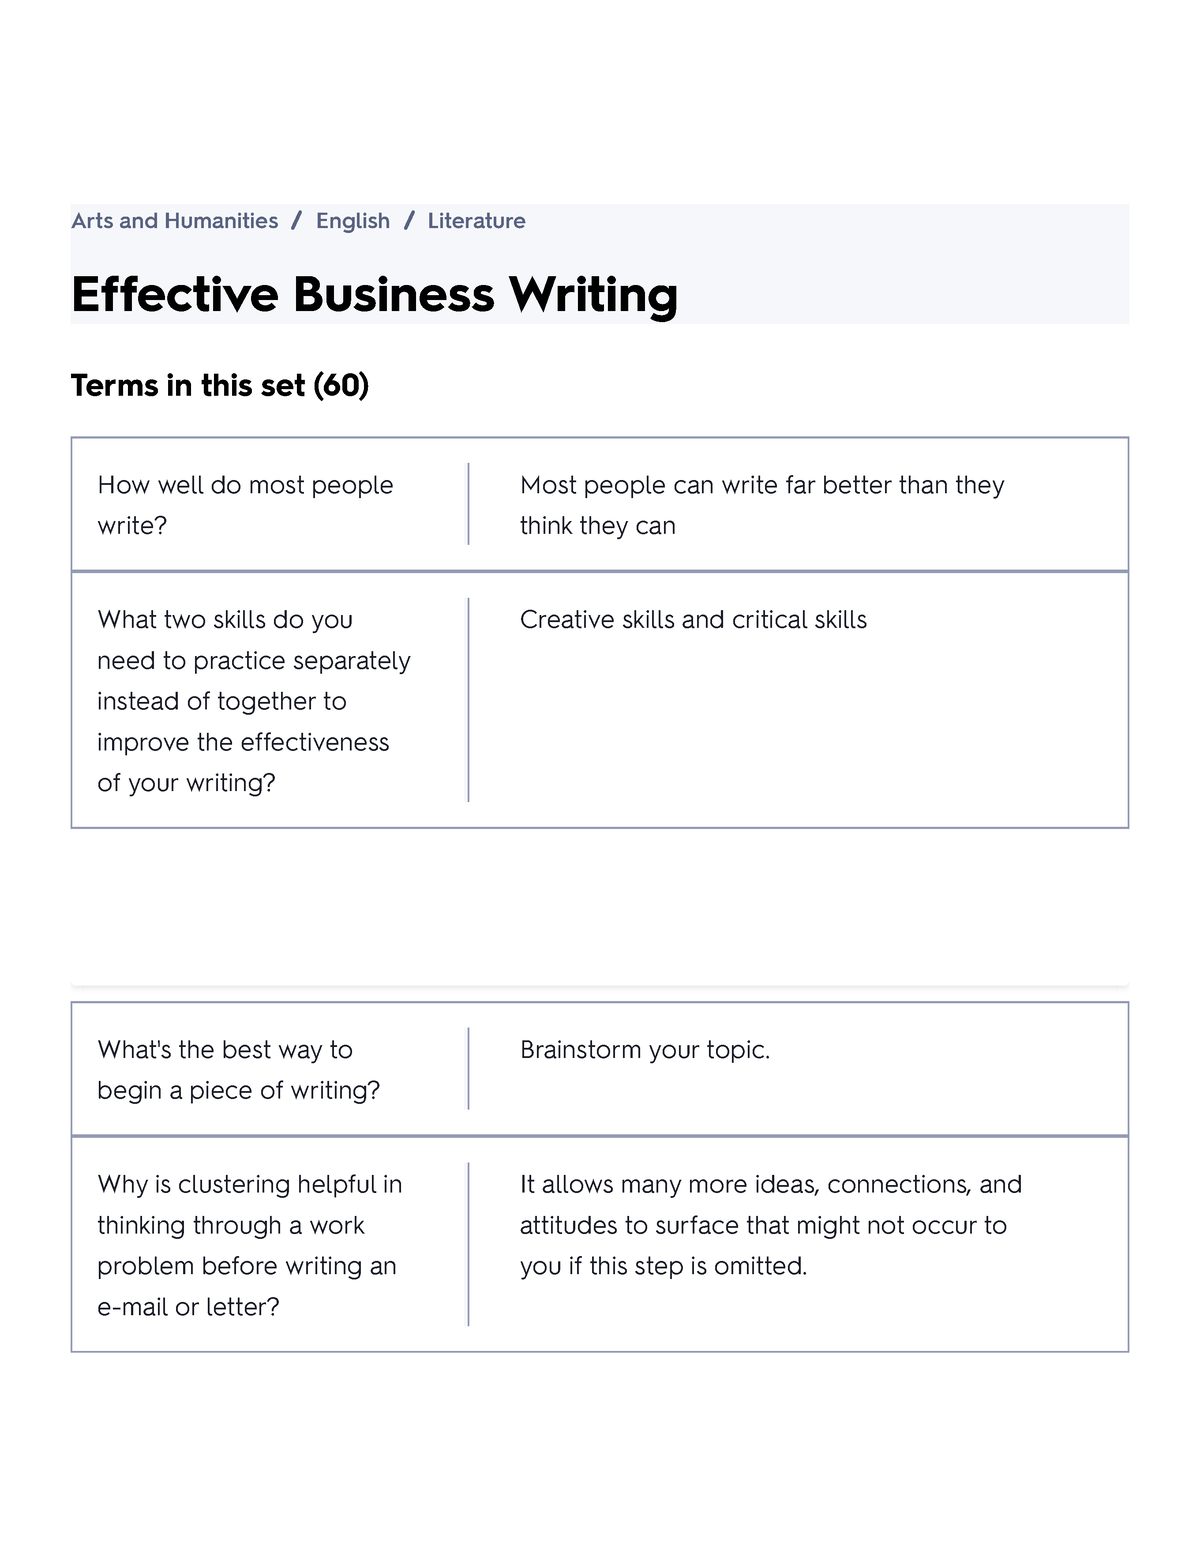 effective writing quizlet